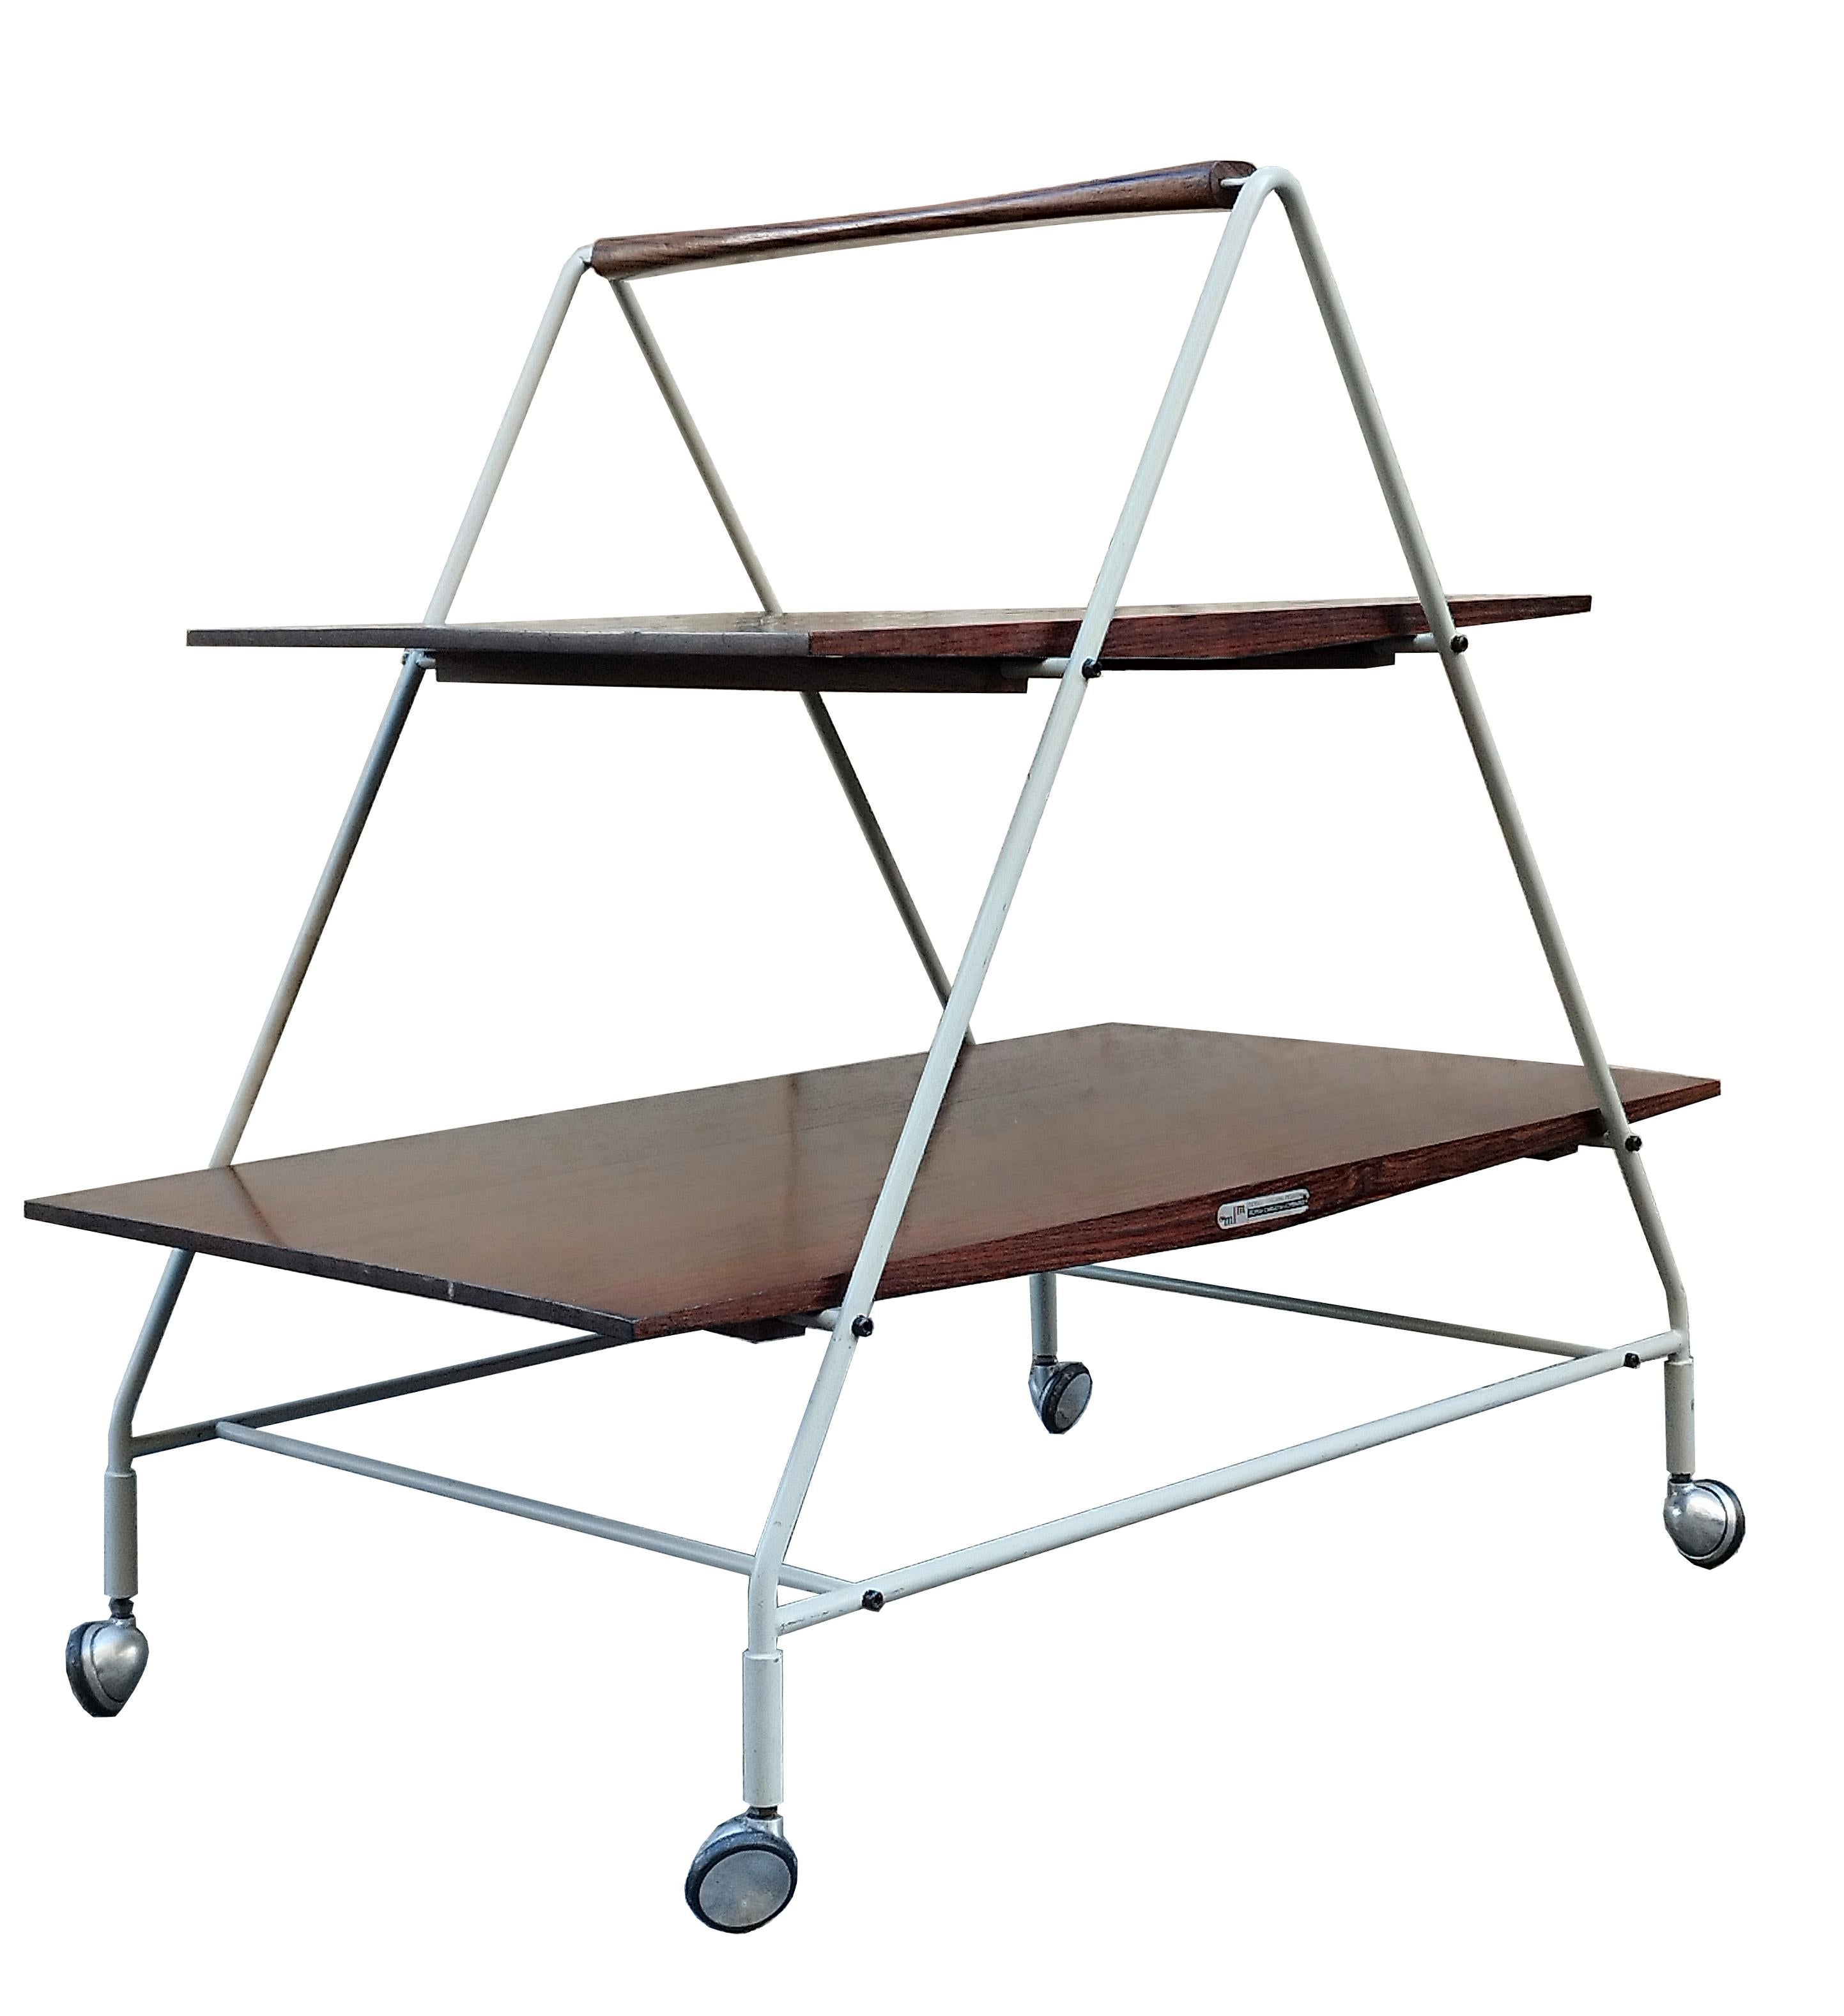 Very rare tea/bar/table trolley model 'M10 Bellagio' by Ico and Luisa Parisi for Mim Roma, Italy 1958, with original label, painted metal frame and two wooden shelves.